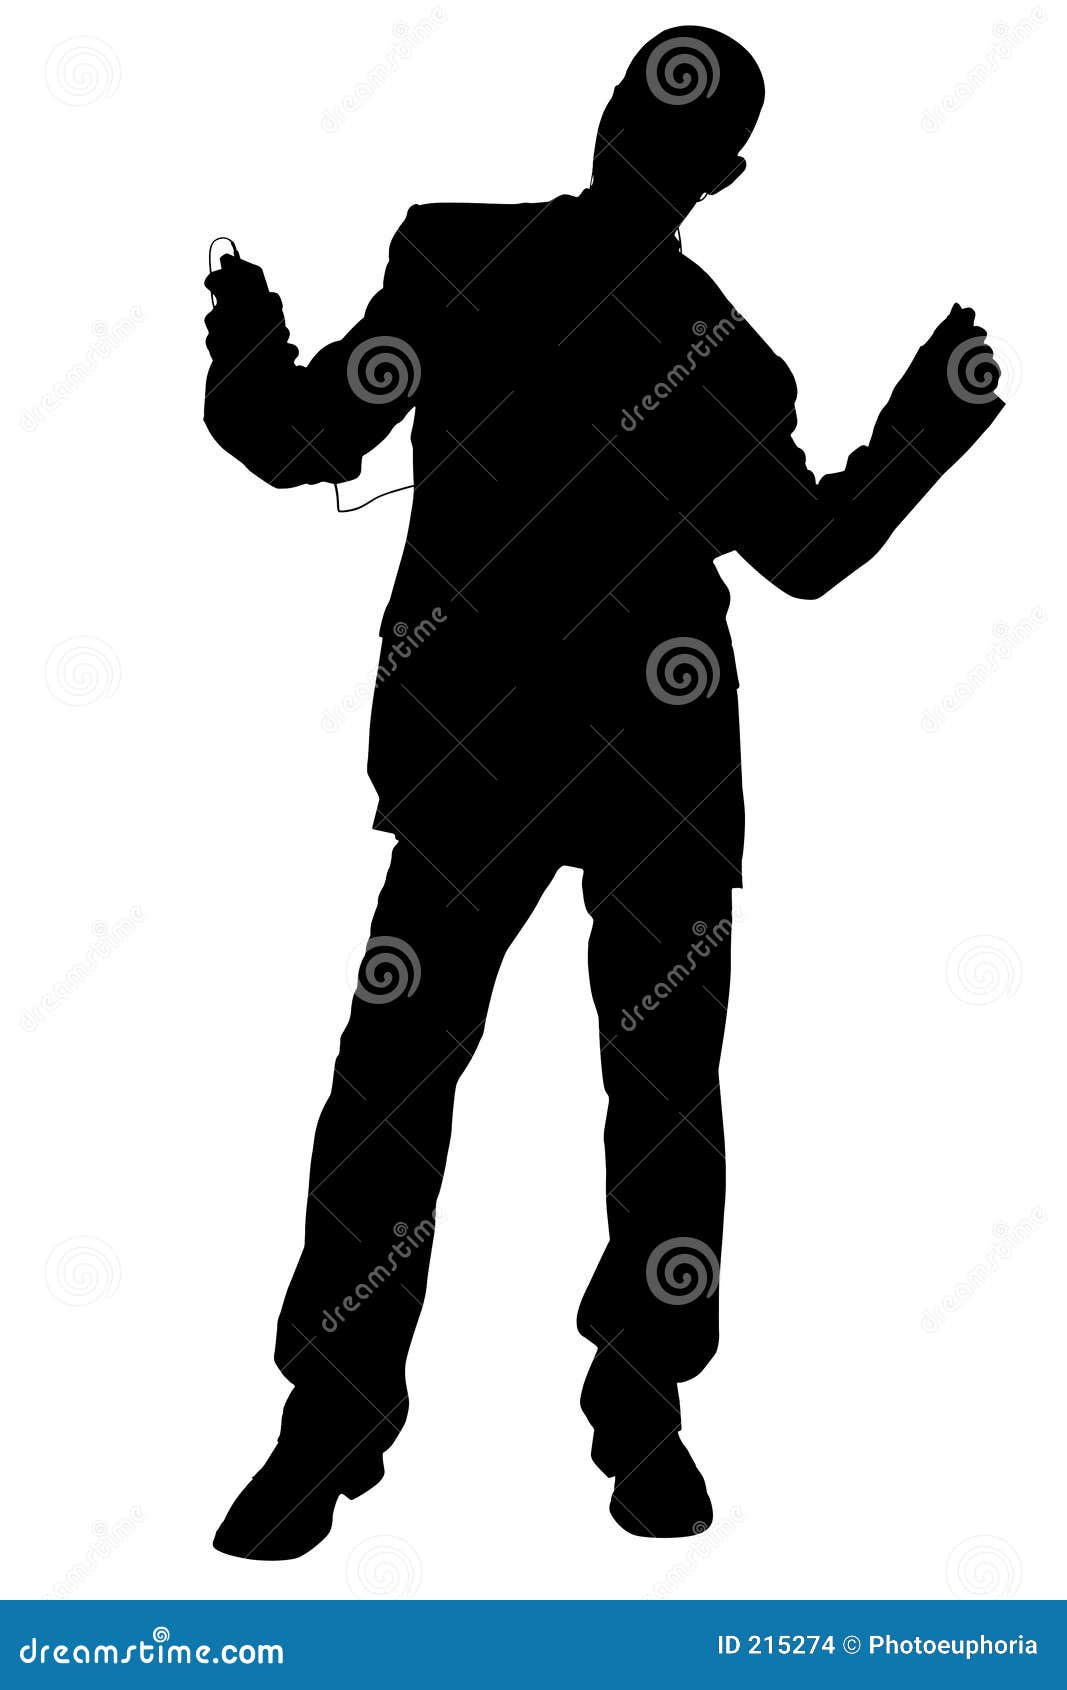 silhouette with clipping path of man in suit dancing wearing headphones